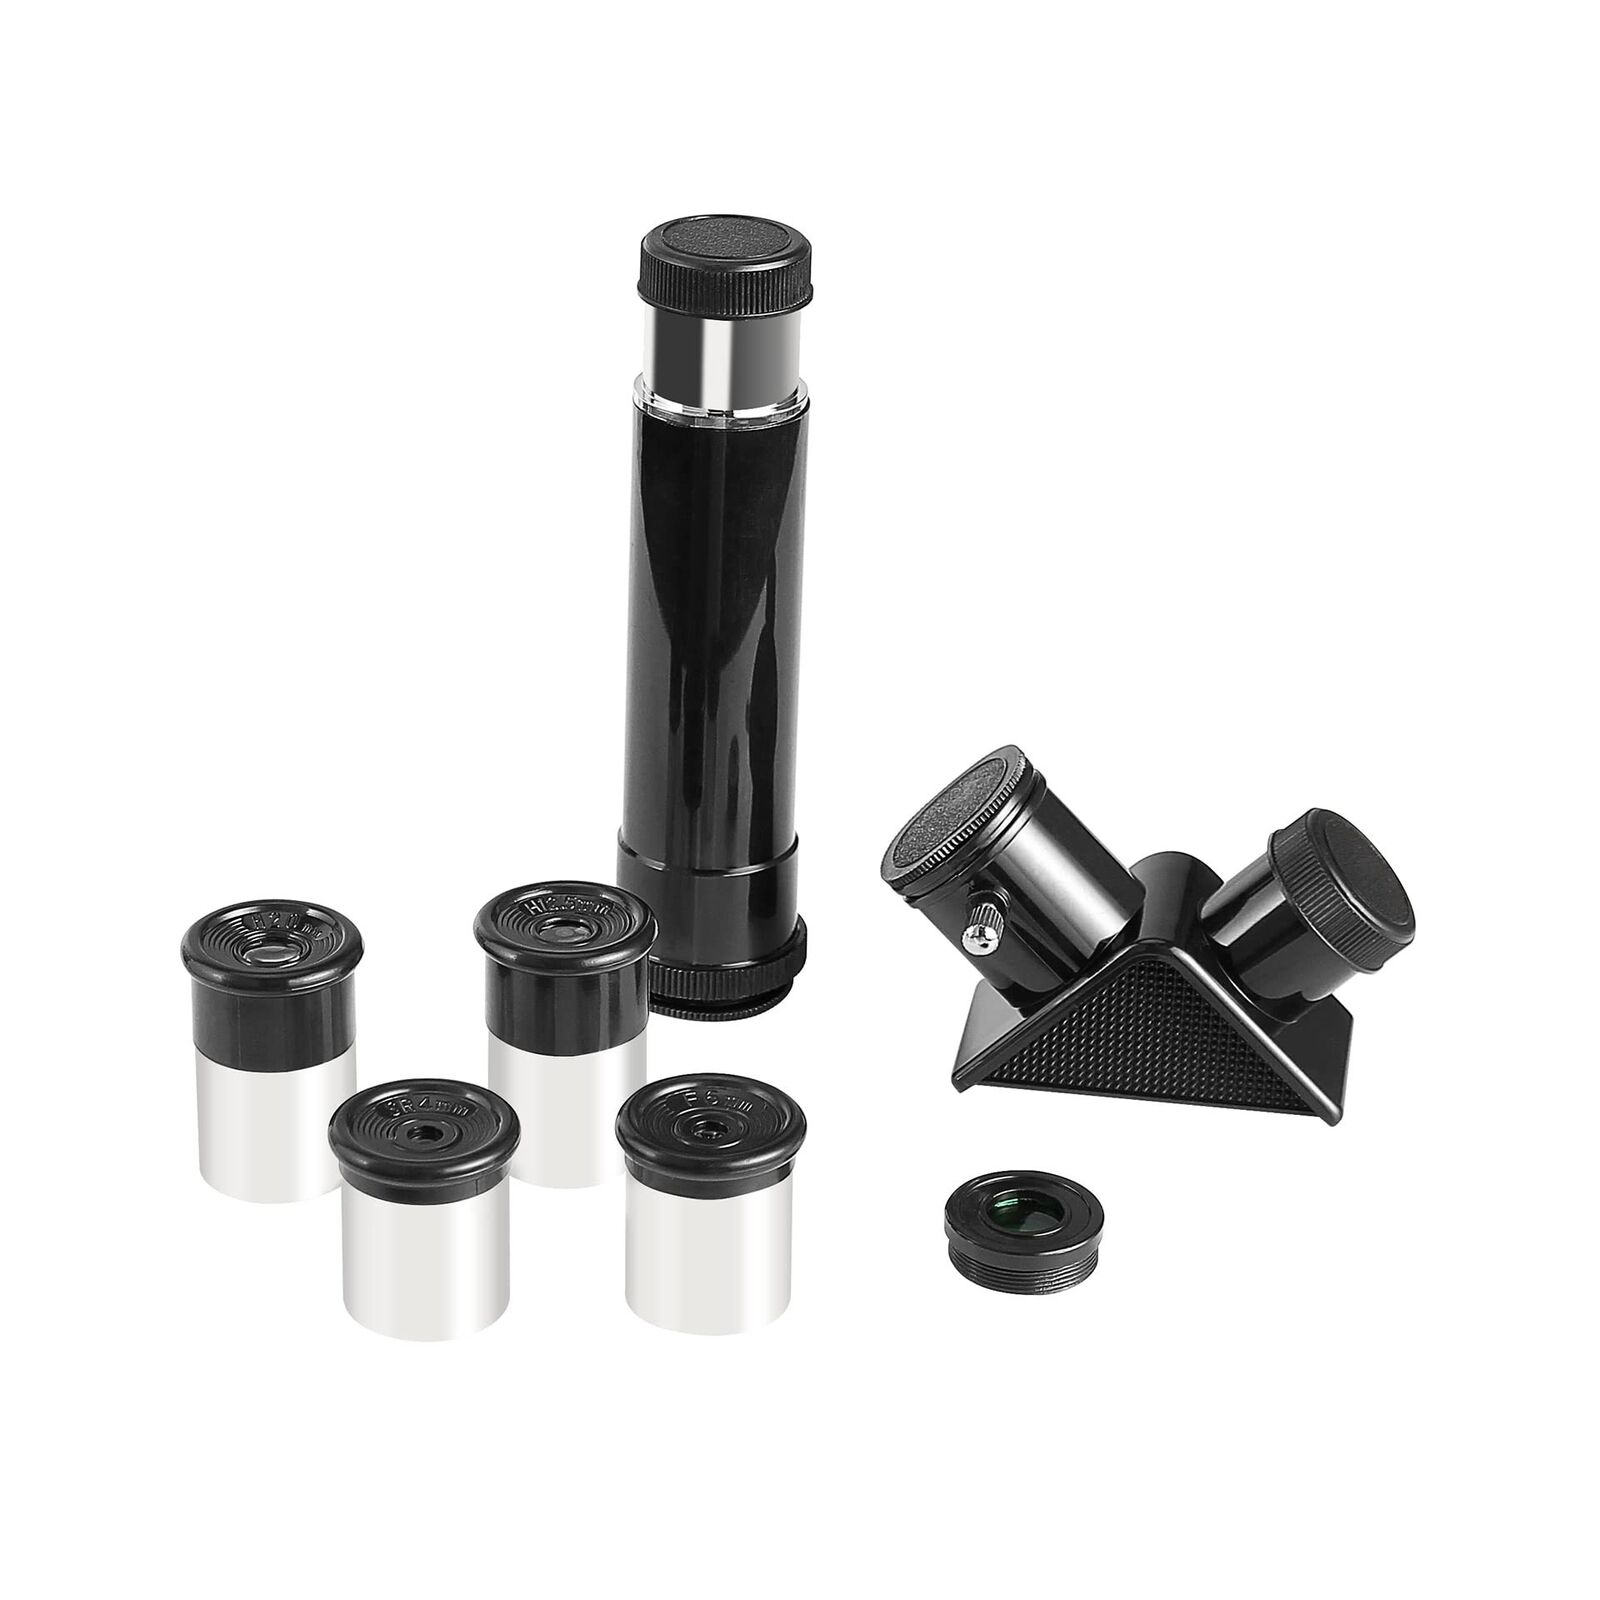 0.965Inch Telescope Accessory Kit for 0.965 Telescope - Comes with Four Eyepi...